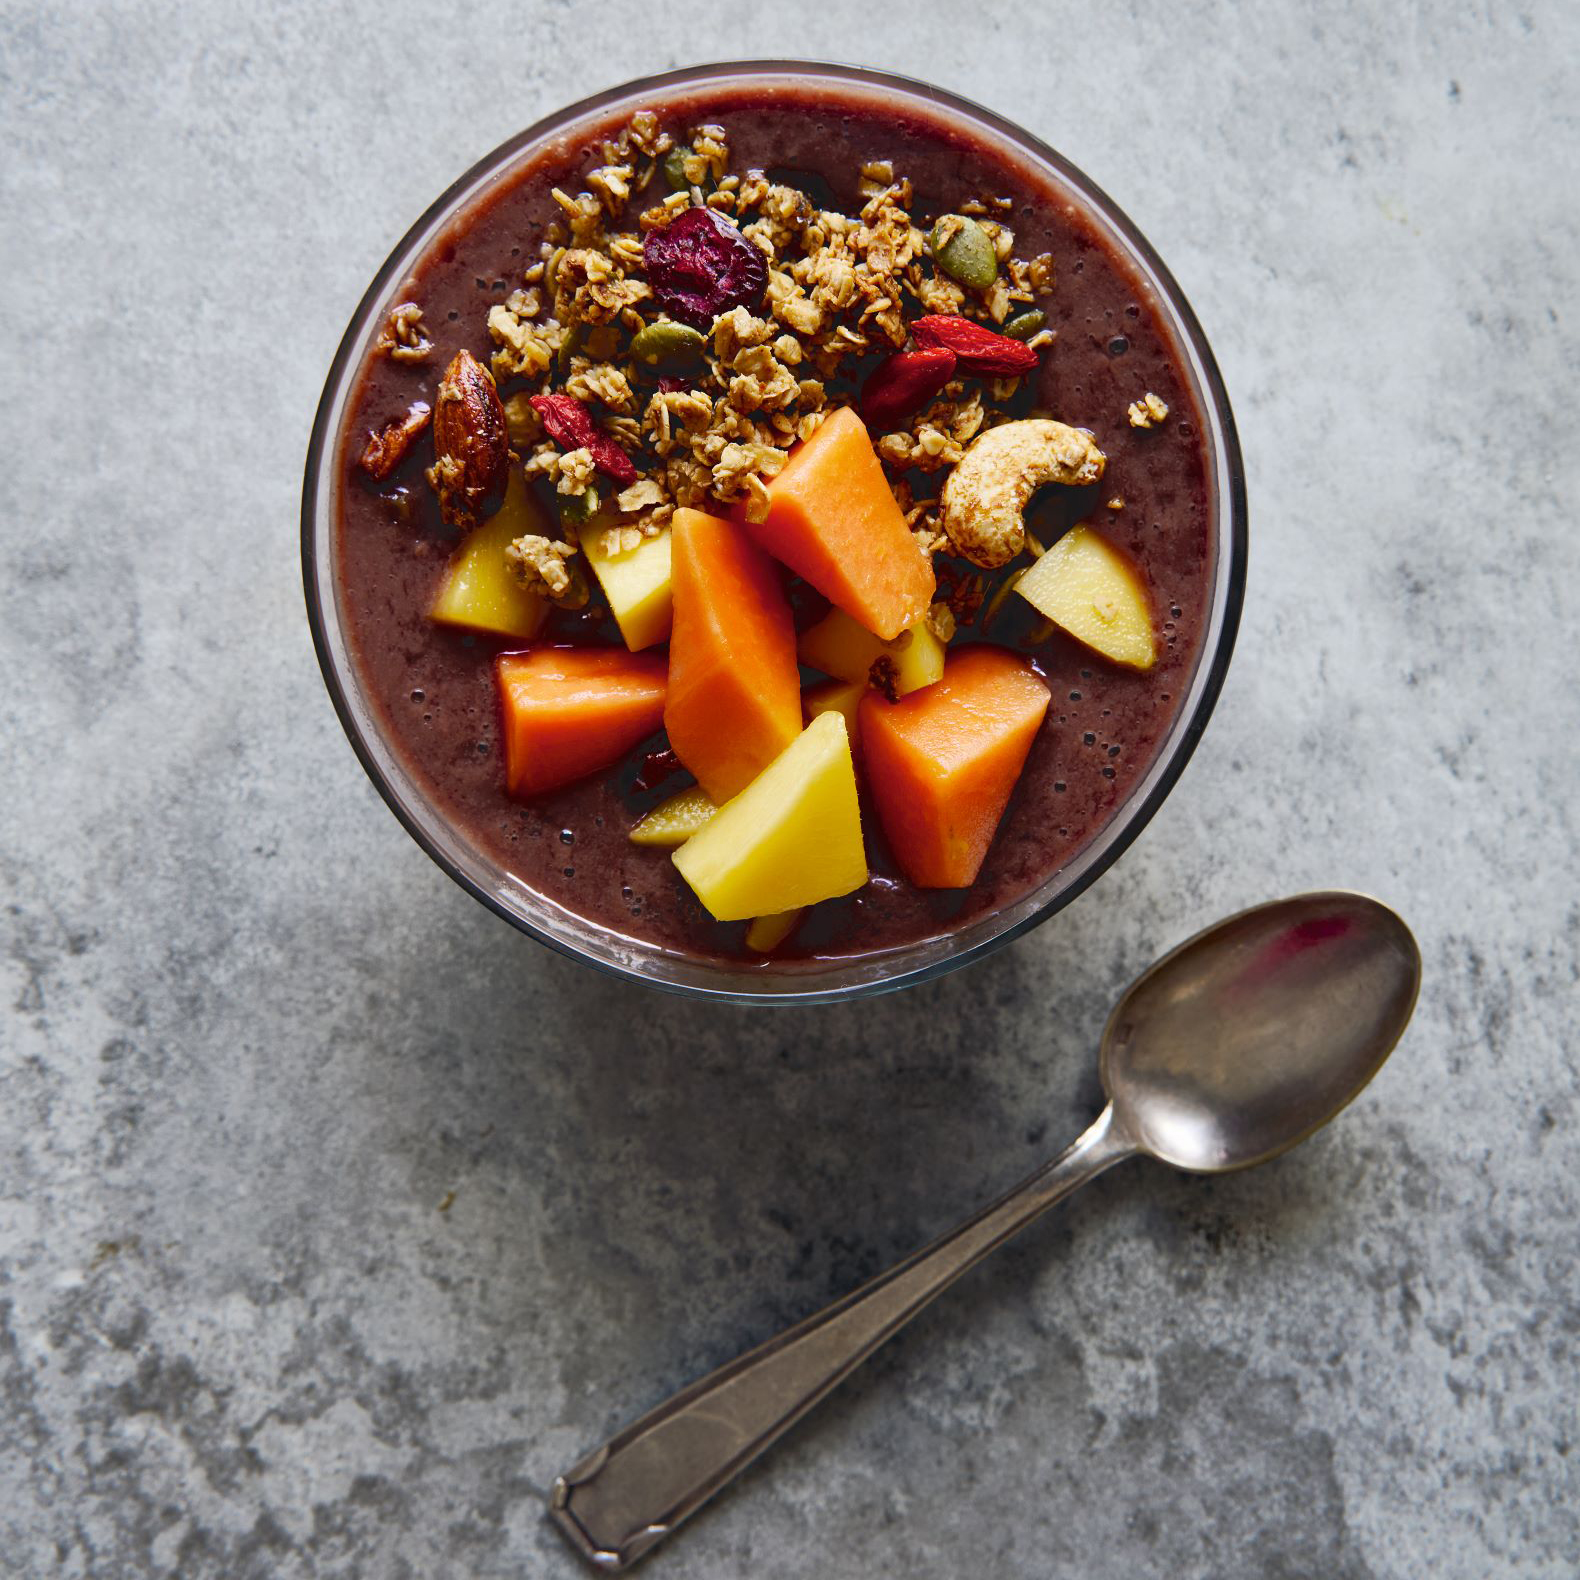 Açai bowl, as featured in Breakfast: The Cookbook